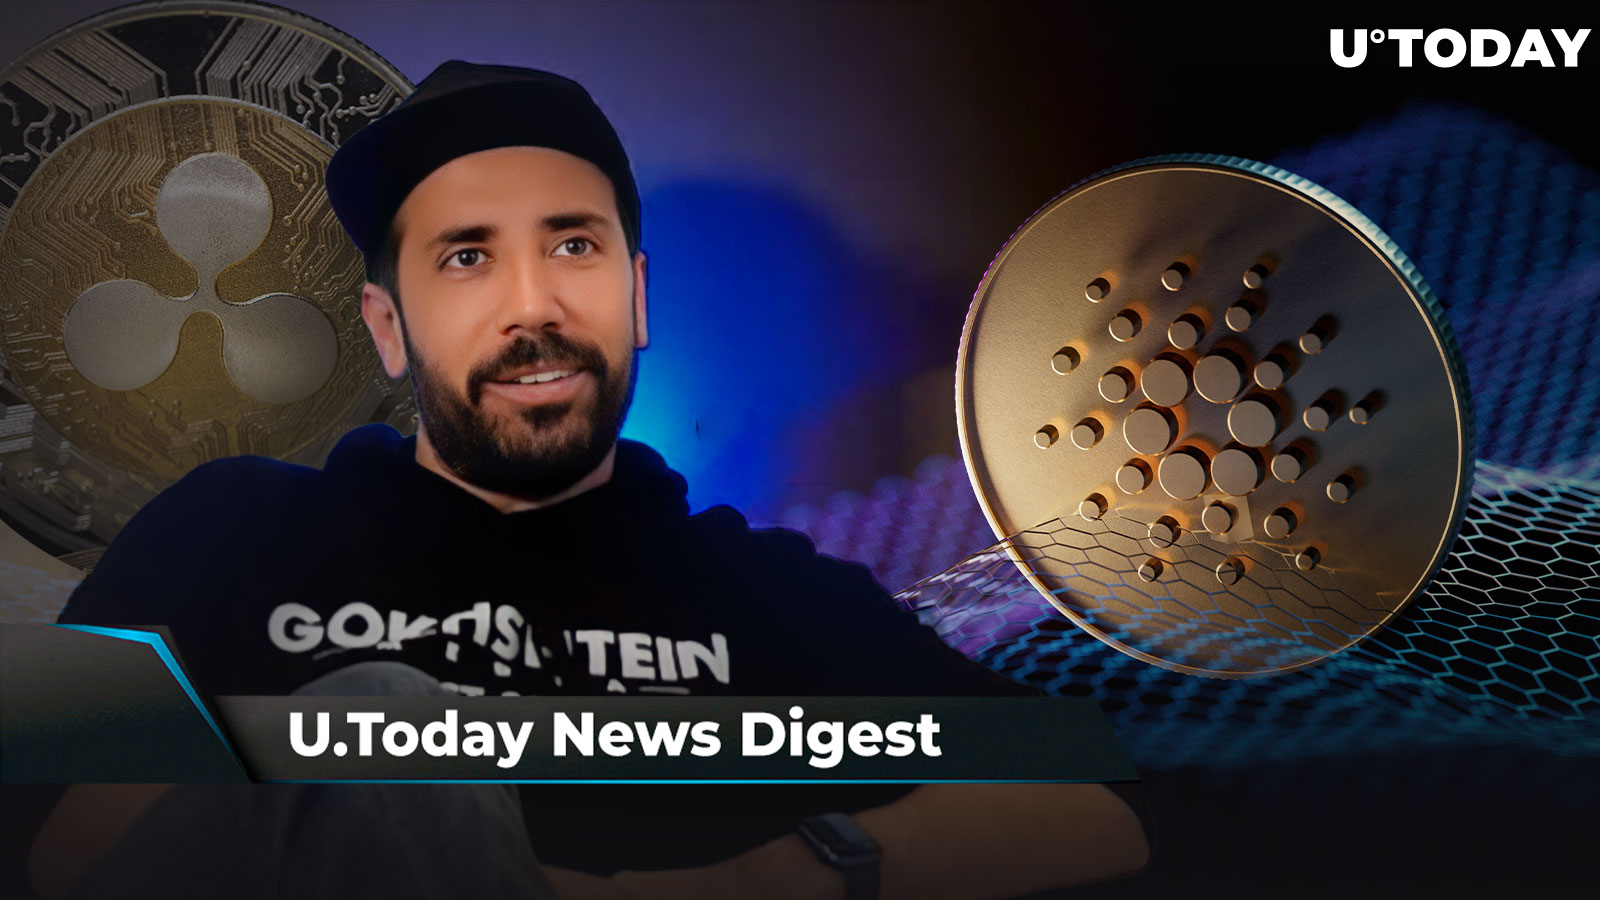 XRP Is up 26% in Week, David Gokhshtein Opines on Impact of Ripple’s Victory on Industry, Cardano’s Big Day Arrives: Crypto News Digest by U.Today